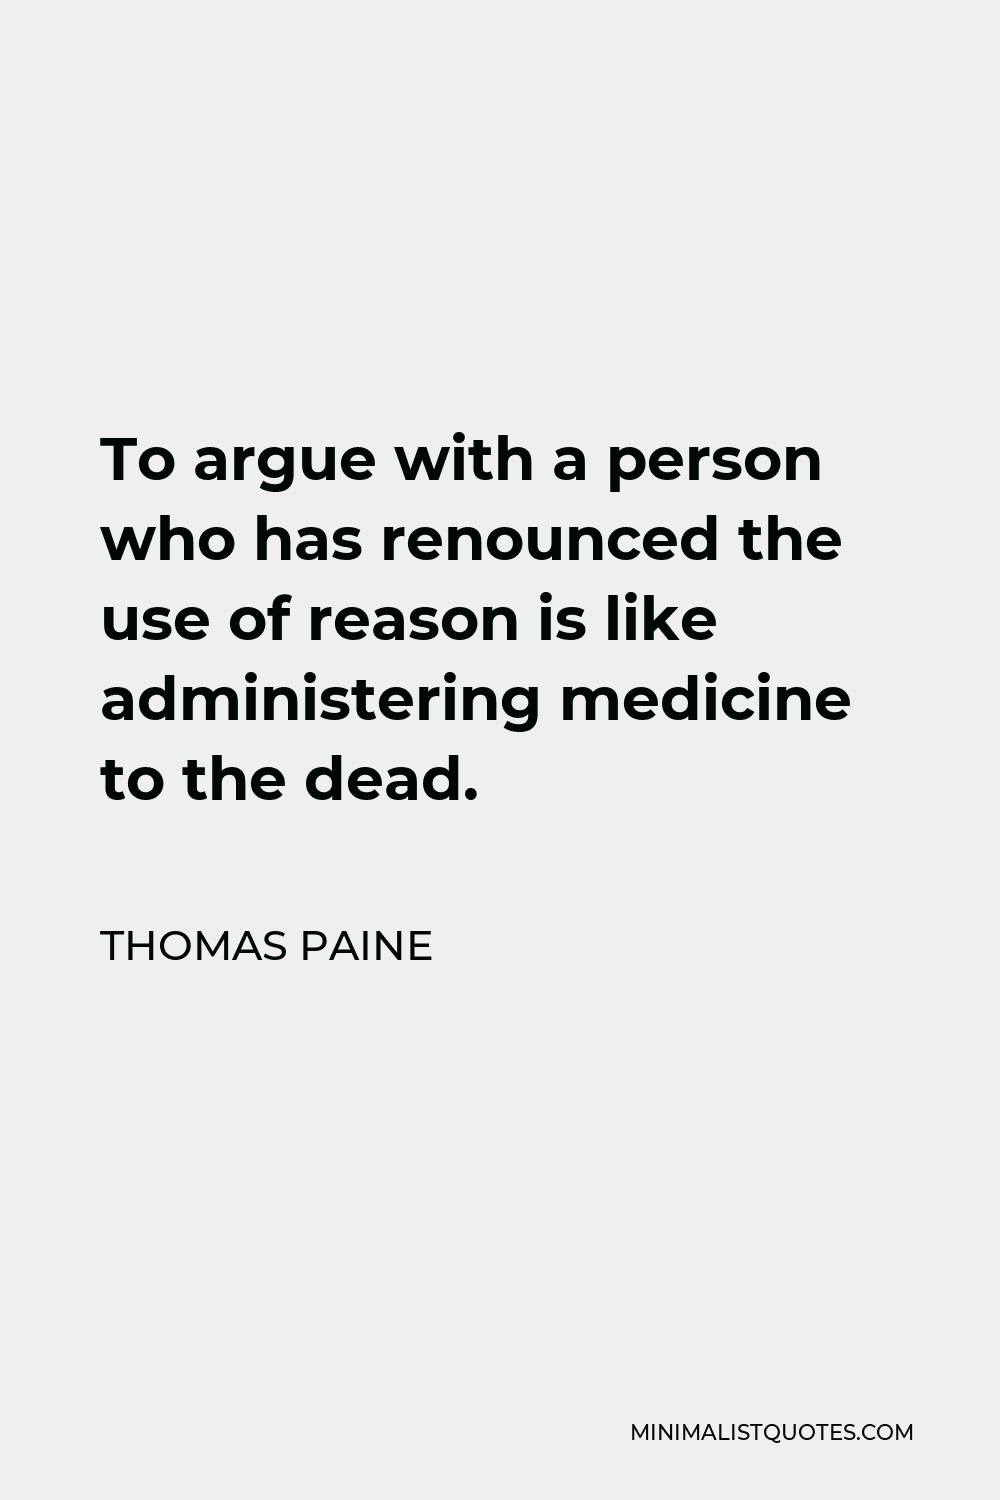 Thomas Paine Quote: To argue with a person who has renounced the ...